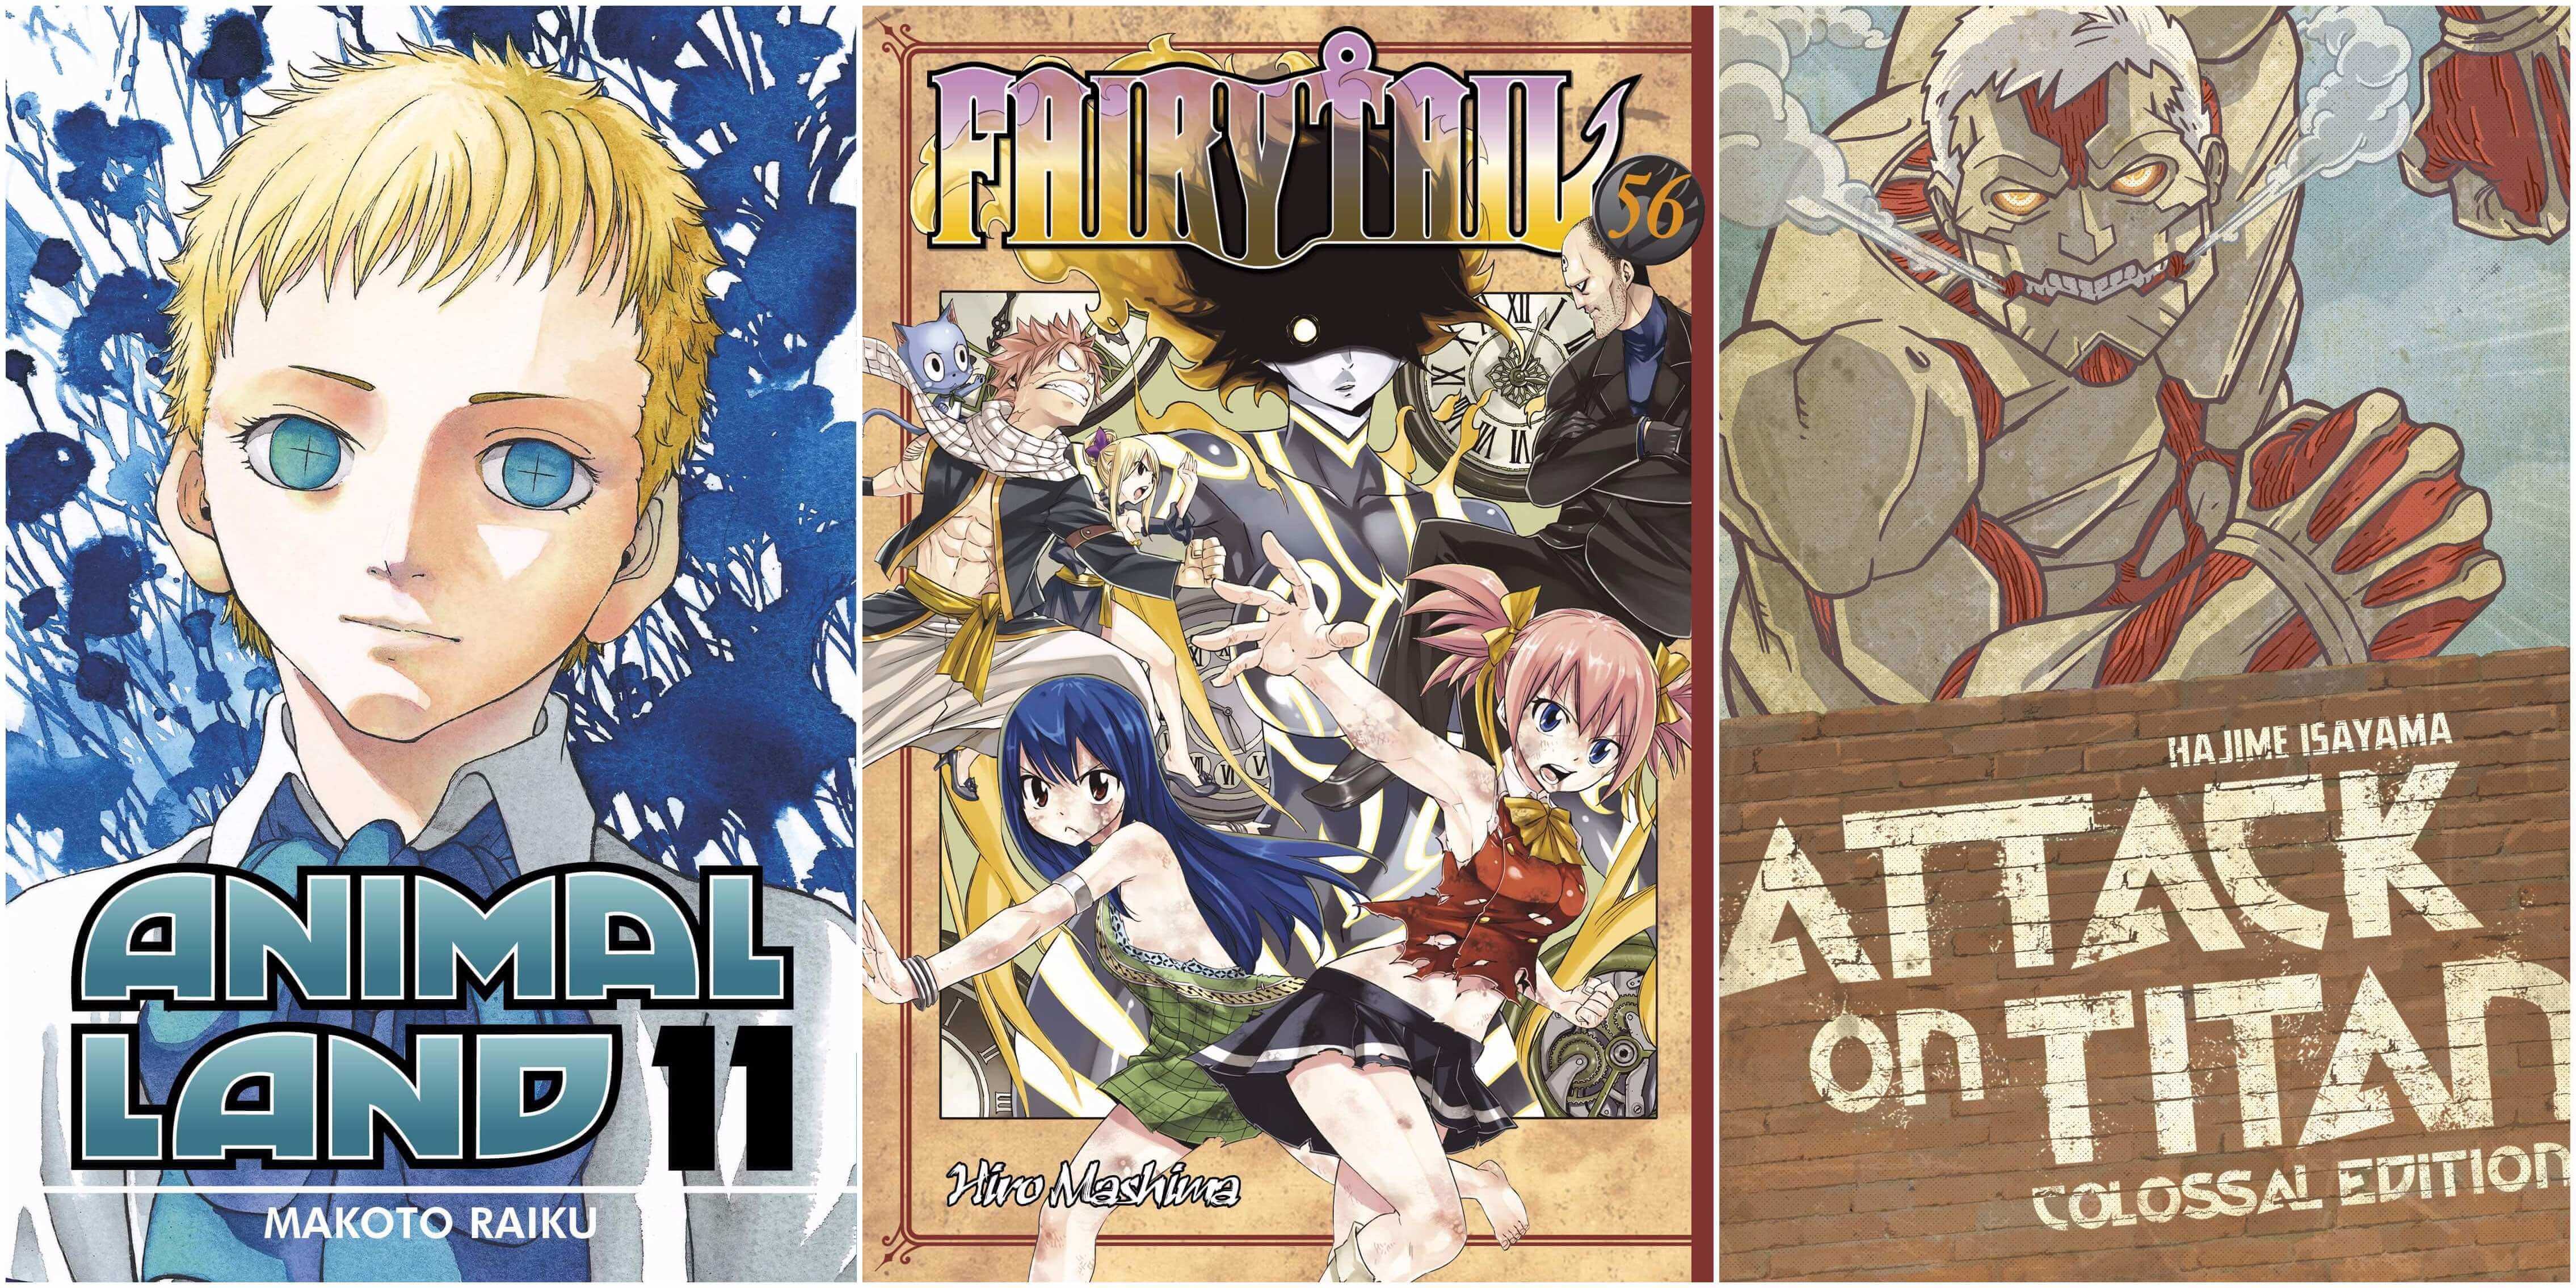 September 2016 Manga Releases Covers for Animal Land, Fairy Tail, and Attack on Titan Colossal Edition.